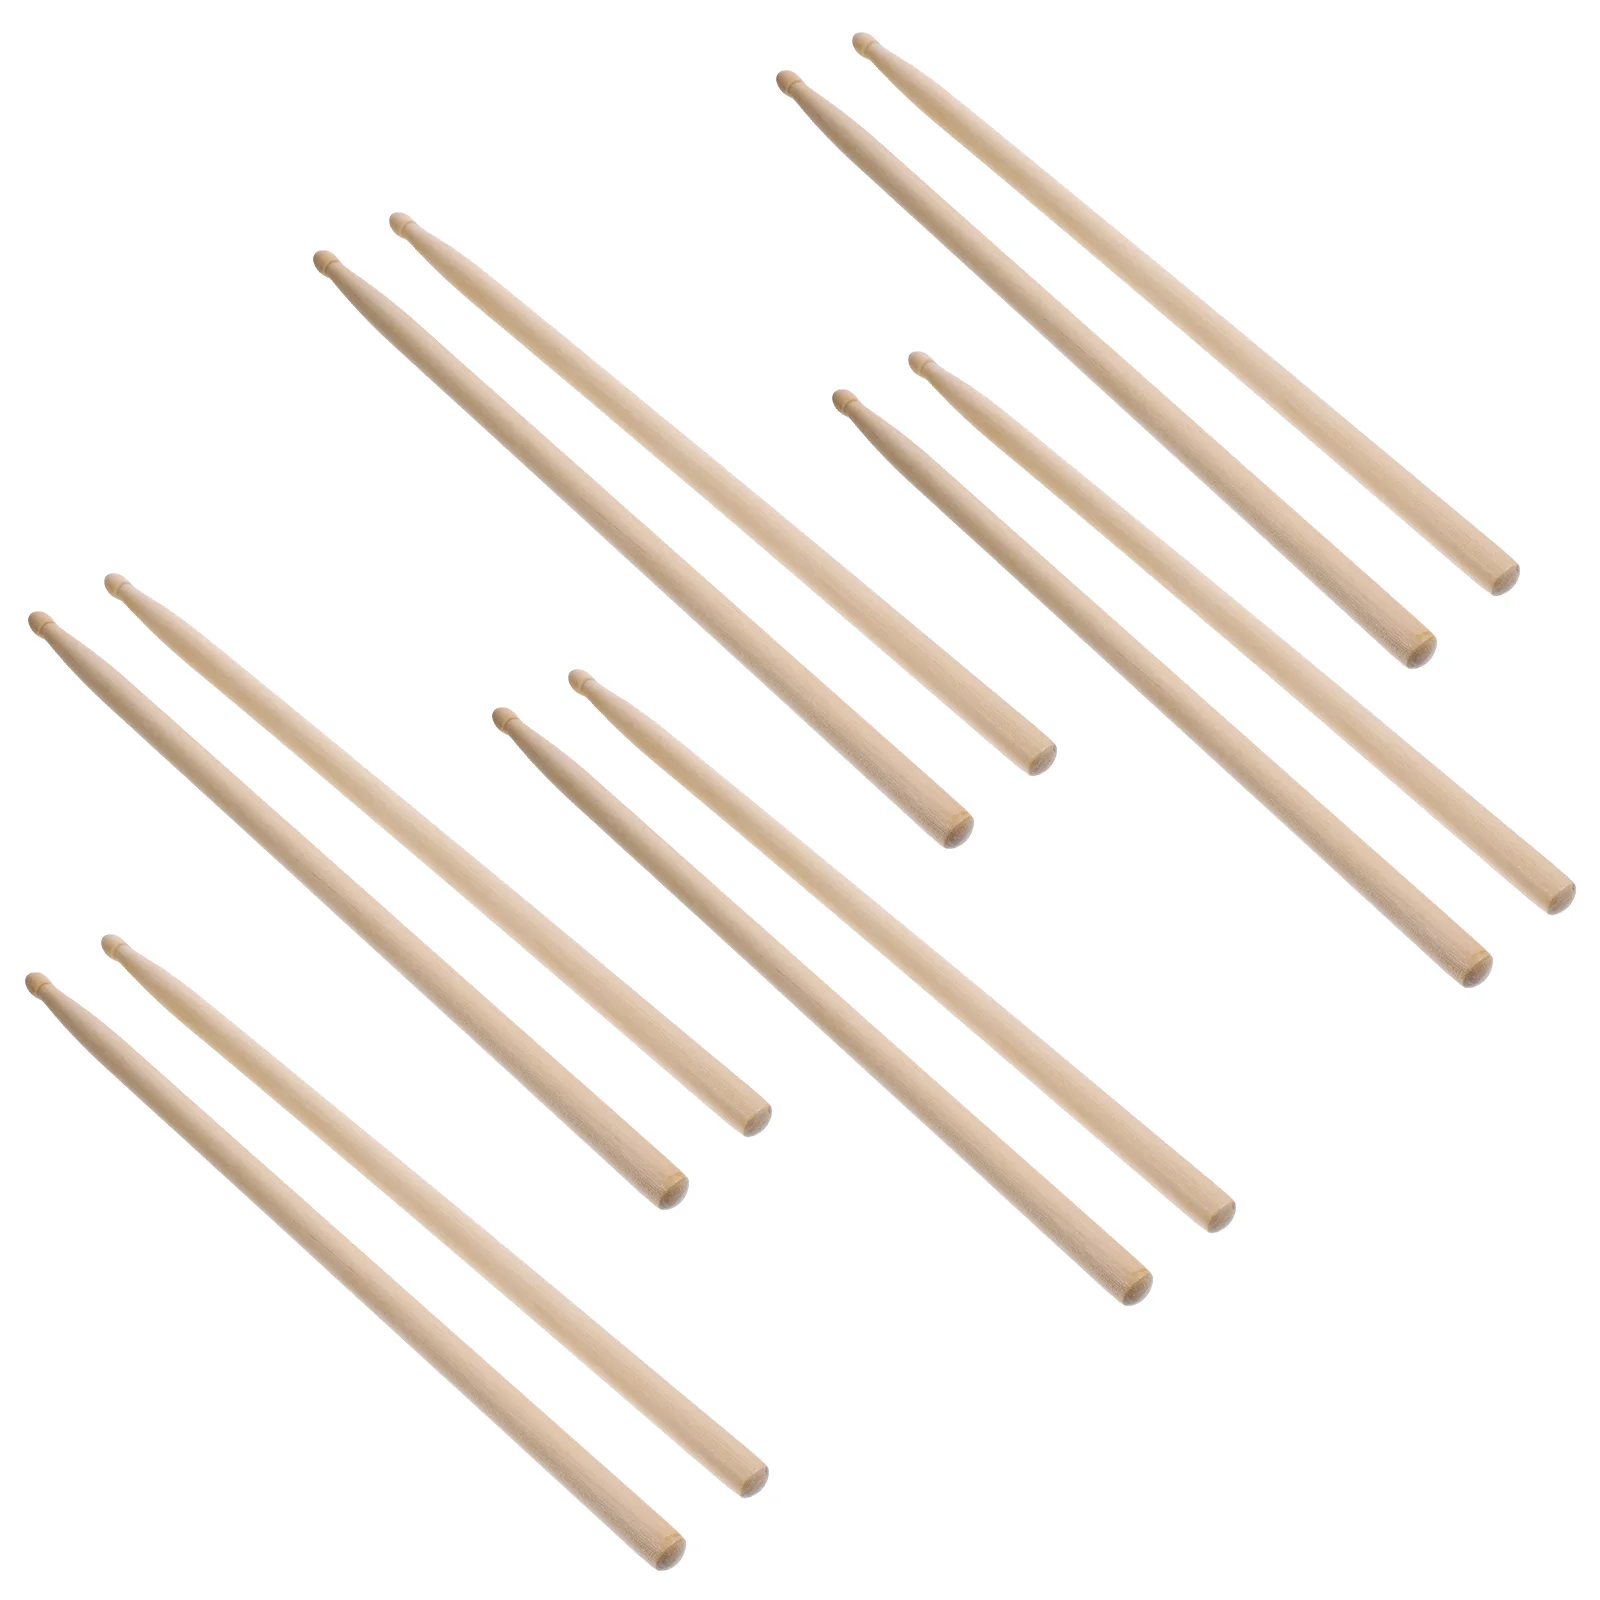 Instrument Mallets 5a Maple Wood Sticks Musical Instruments Drumsticks For Practice maple wood drumsticks stick 1 pair drum sticks maple 5a lightweight wood color drum sticks for drum musical aparts maple 5a size